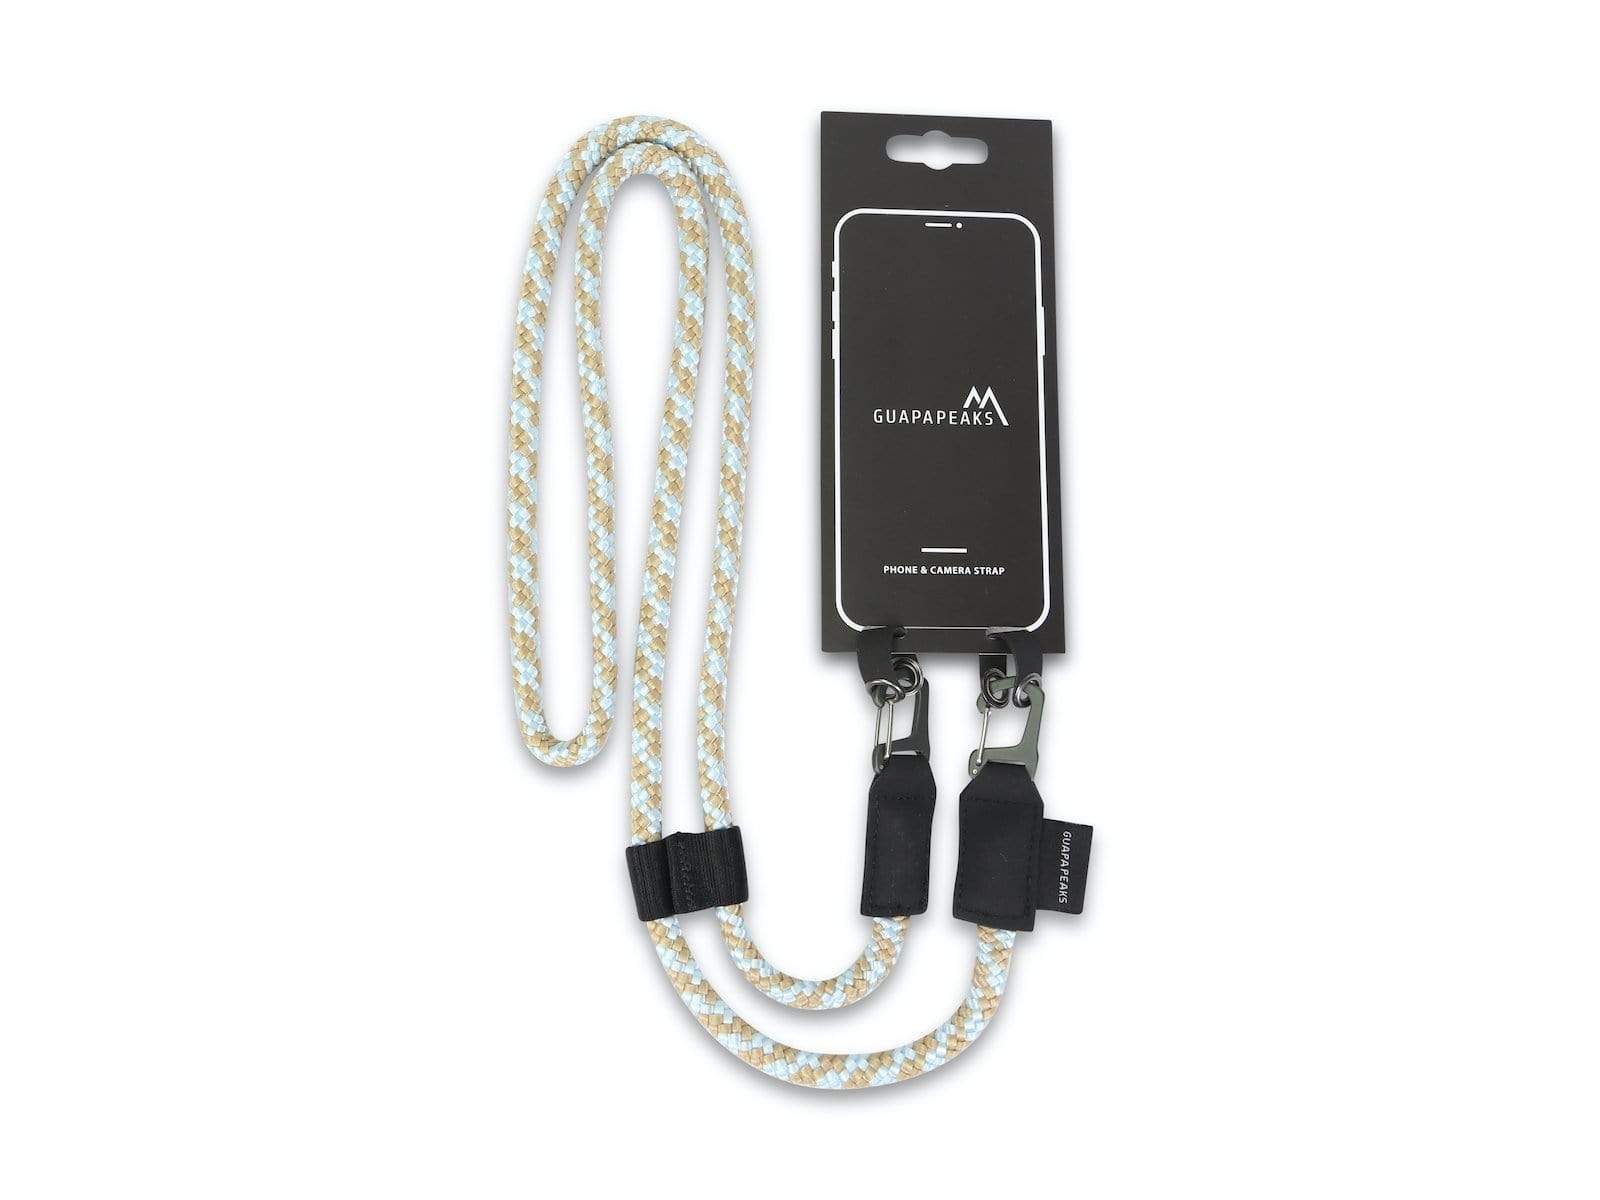 Phone & Camera Rope Necklace Strap